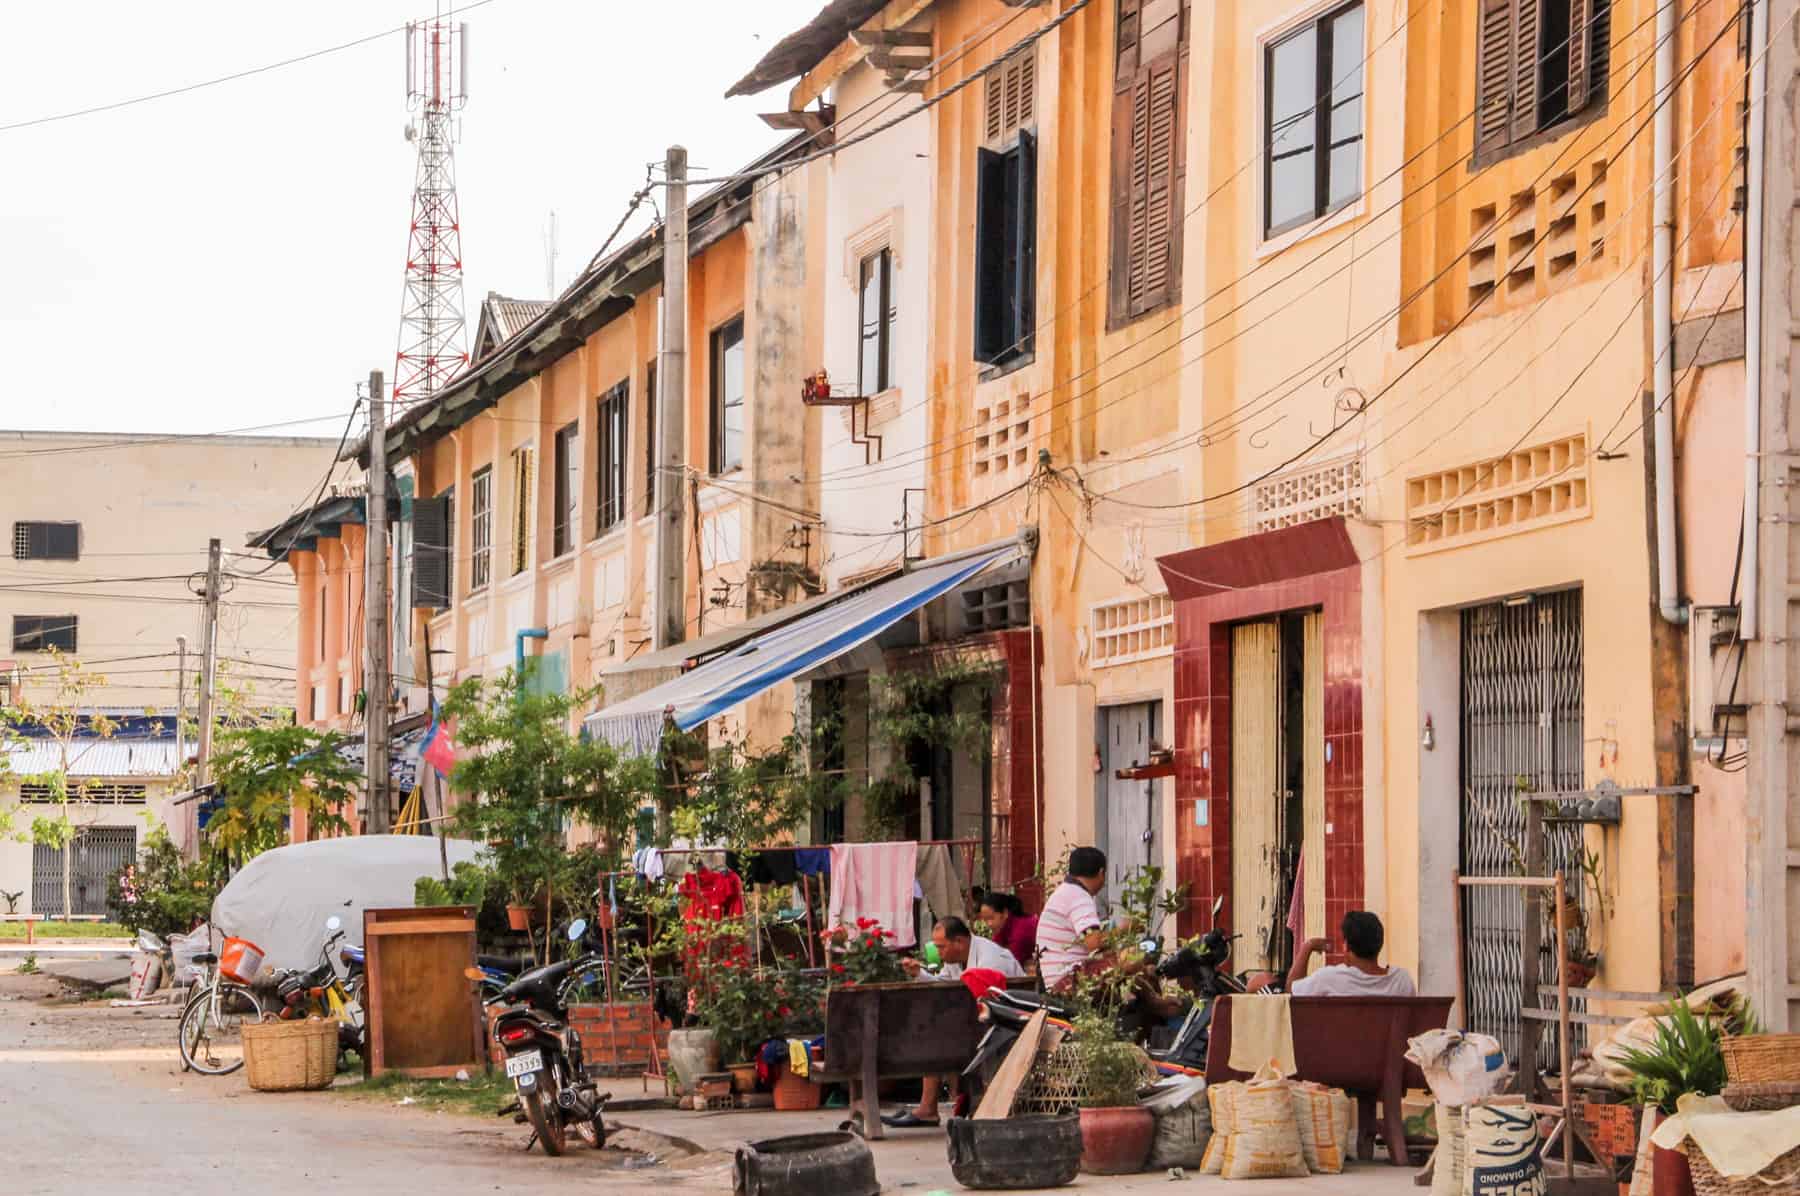 Kampot locals sitting outside a French colonial style row of houses in striped hues of yellow and orange.